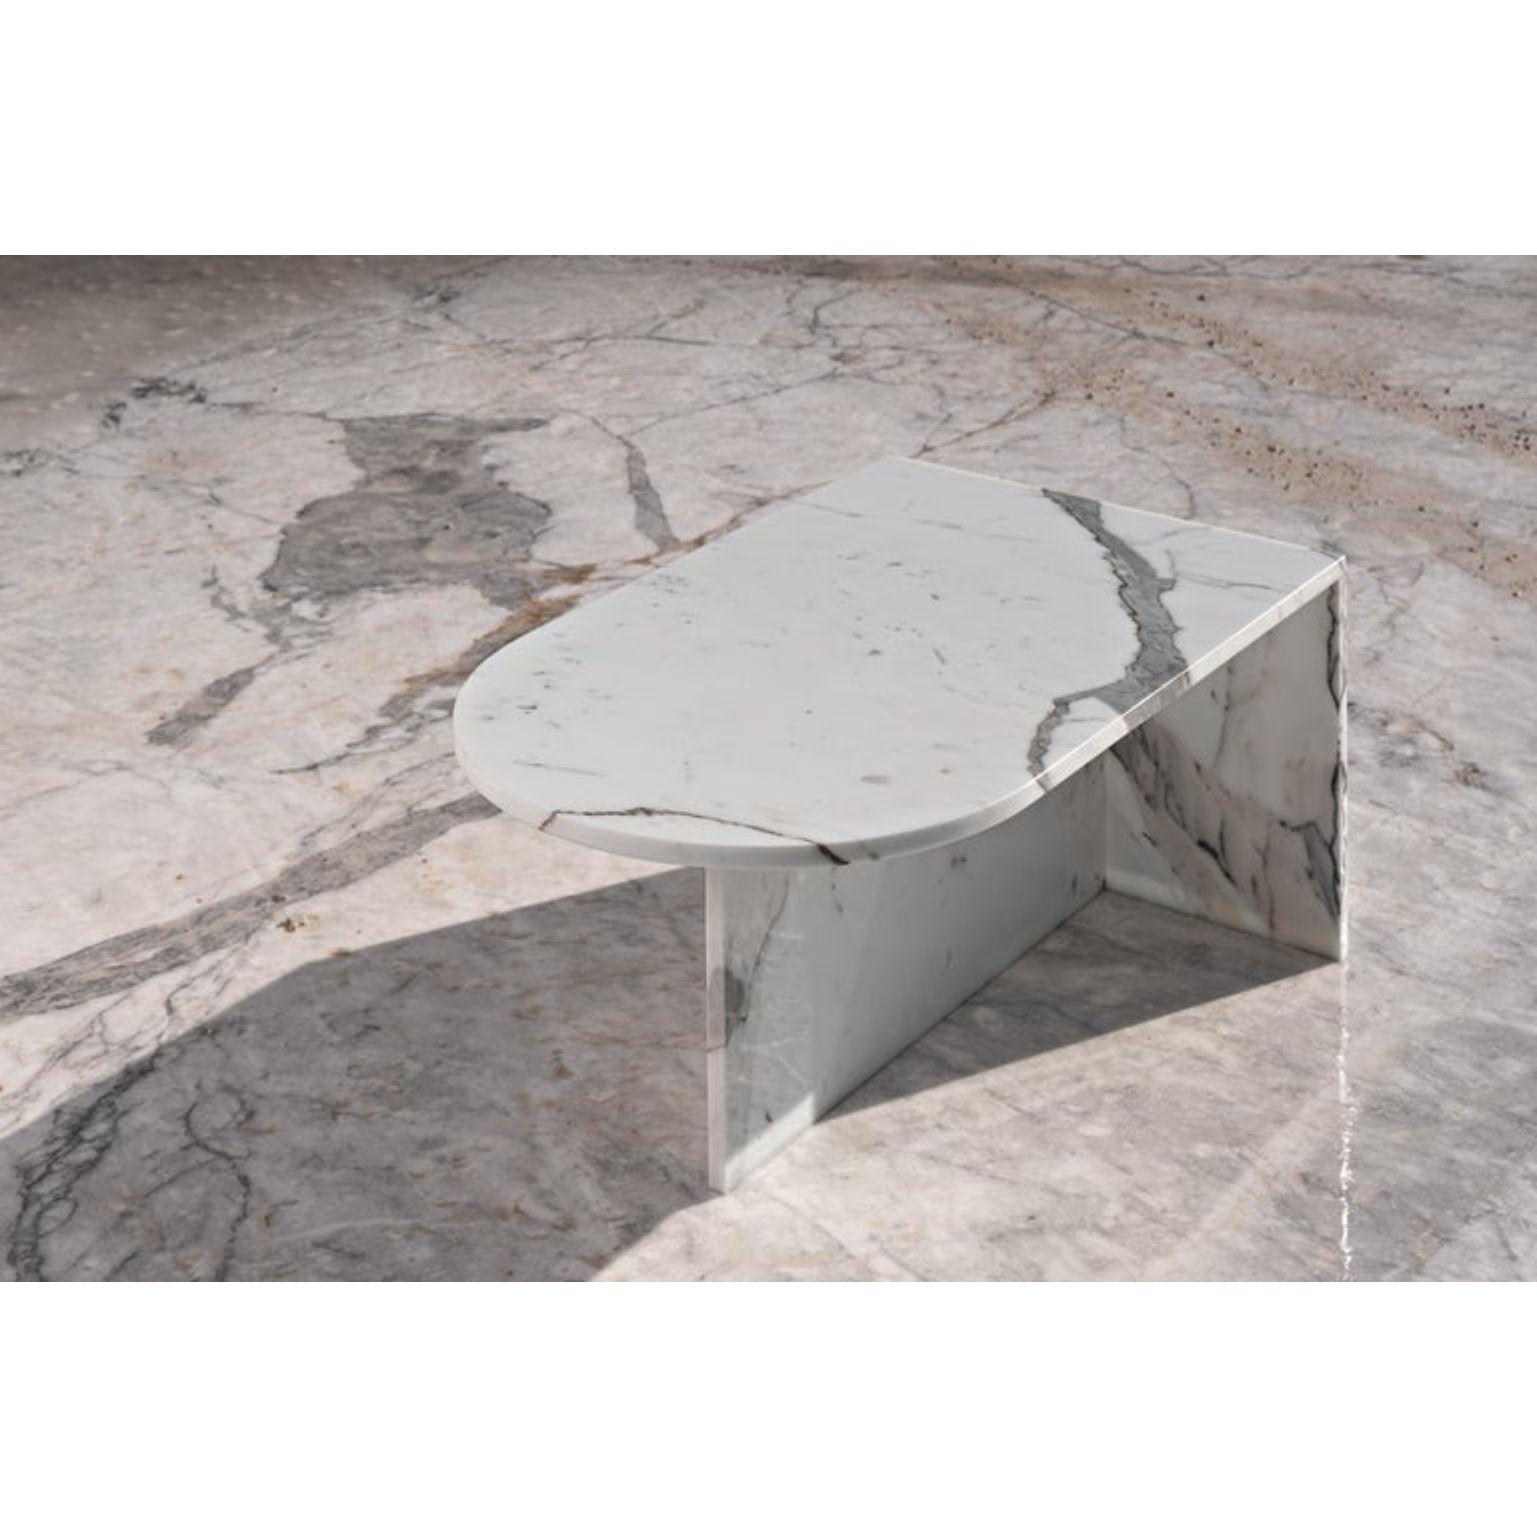 Ara marble coffee table by Edition Club
Edition 6 of 6
Dimensions: L 90 x W 55 x H 40 cm
Materials: Features Arabascato marble direct from the hills of Carrara
65 kgs

Arabascato marble direct from the hills of Carrara, Italy with its